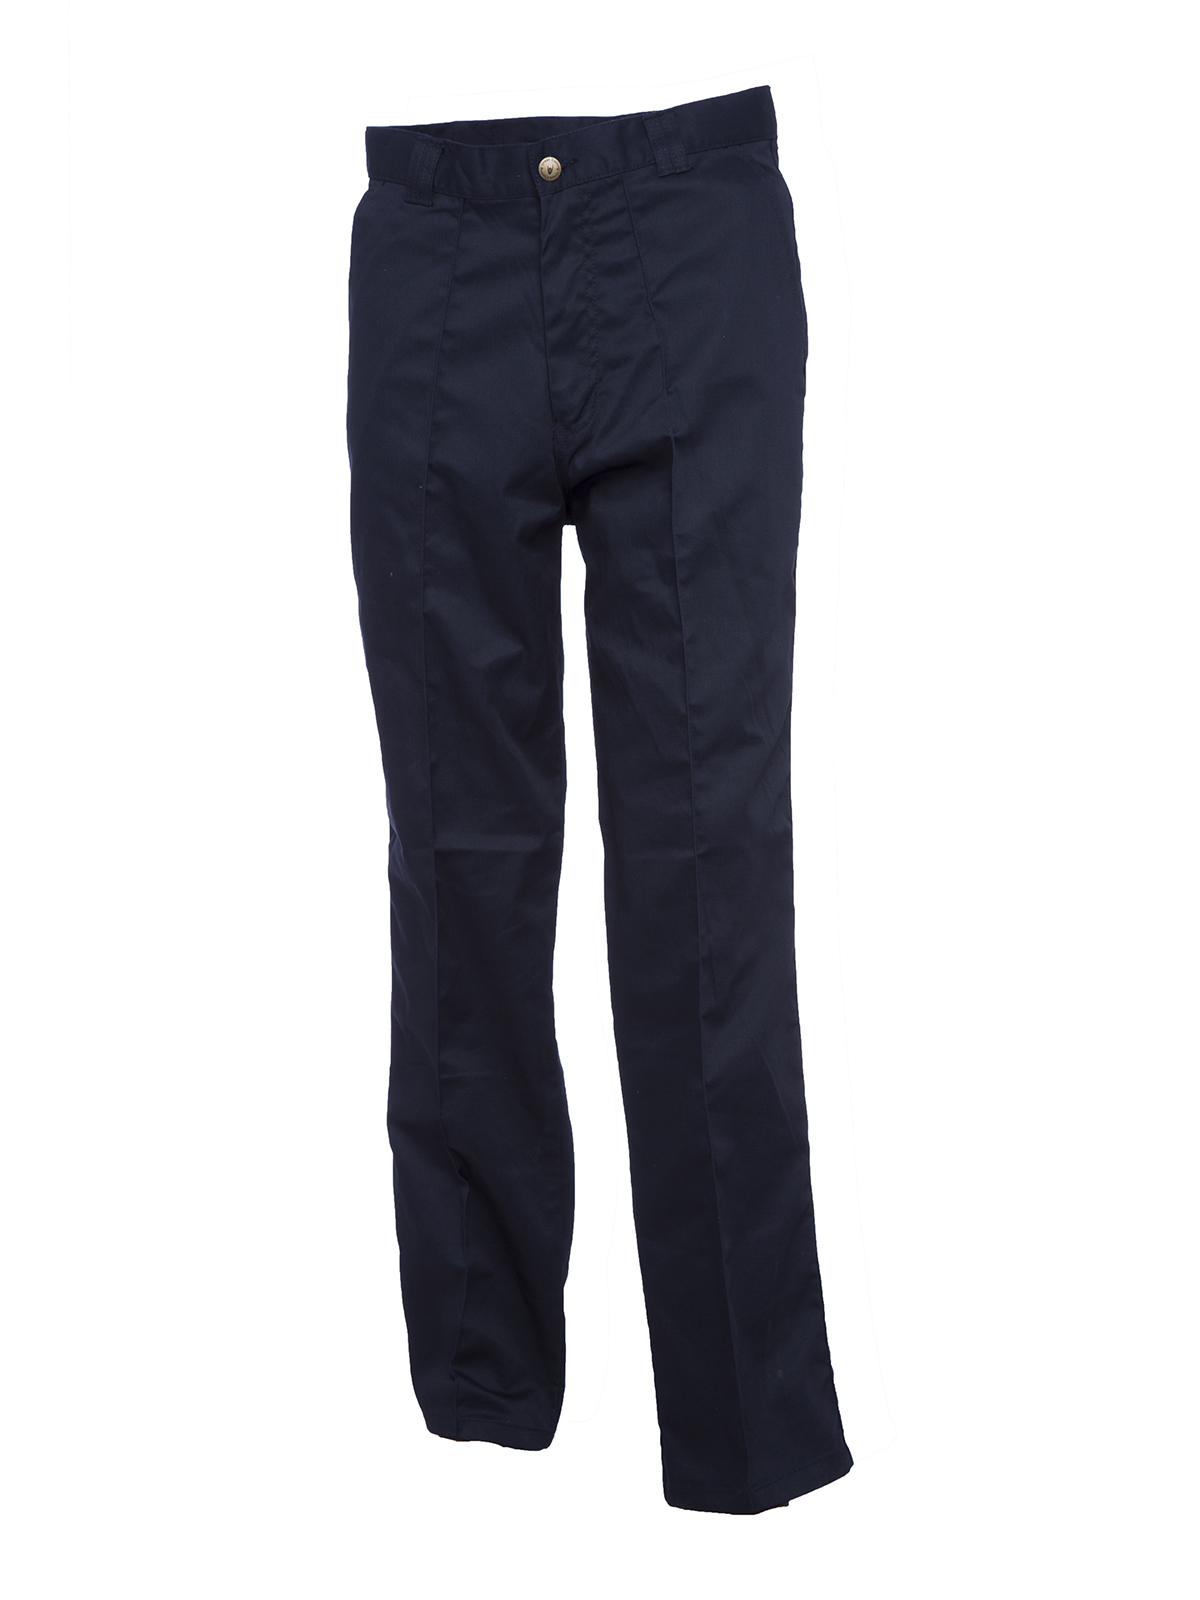 Workwear Trousers, Navy Blue - 28R